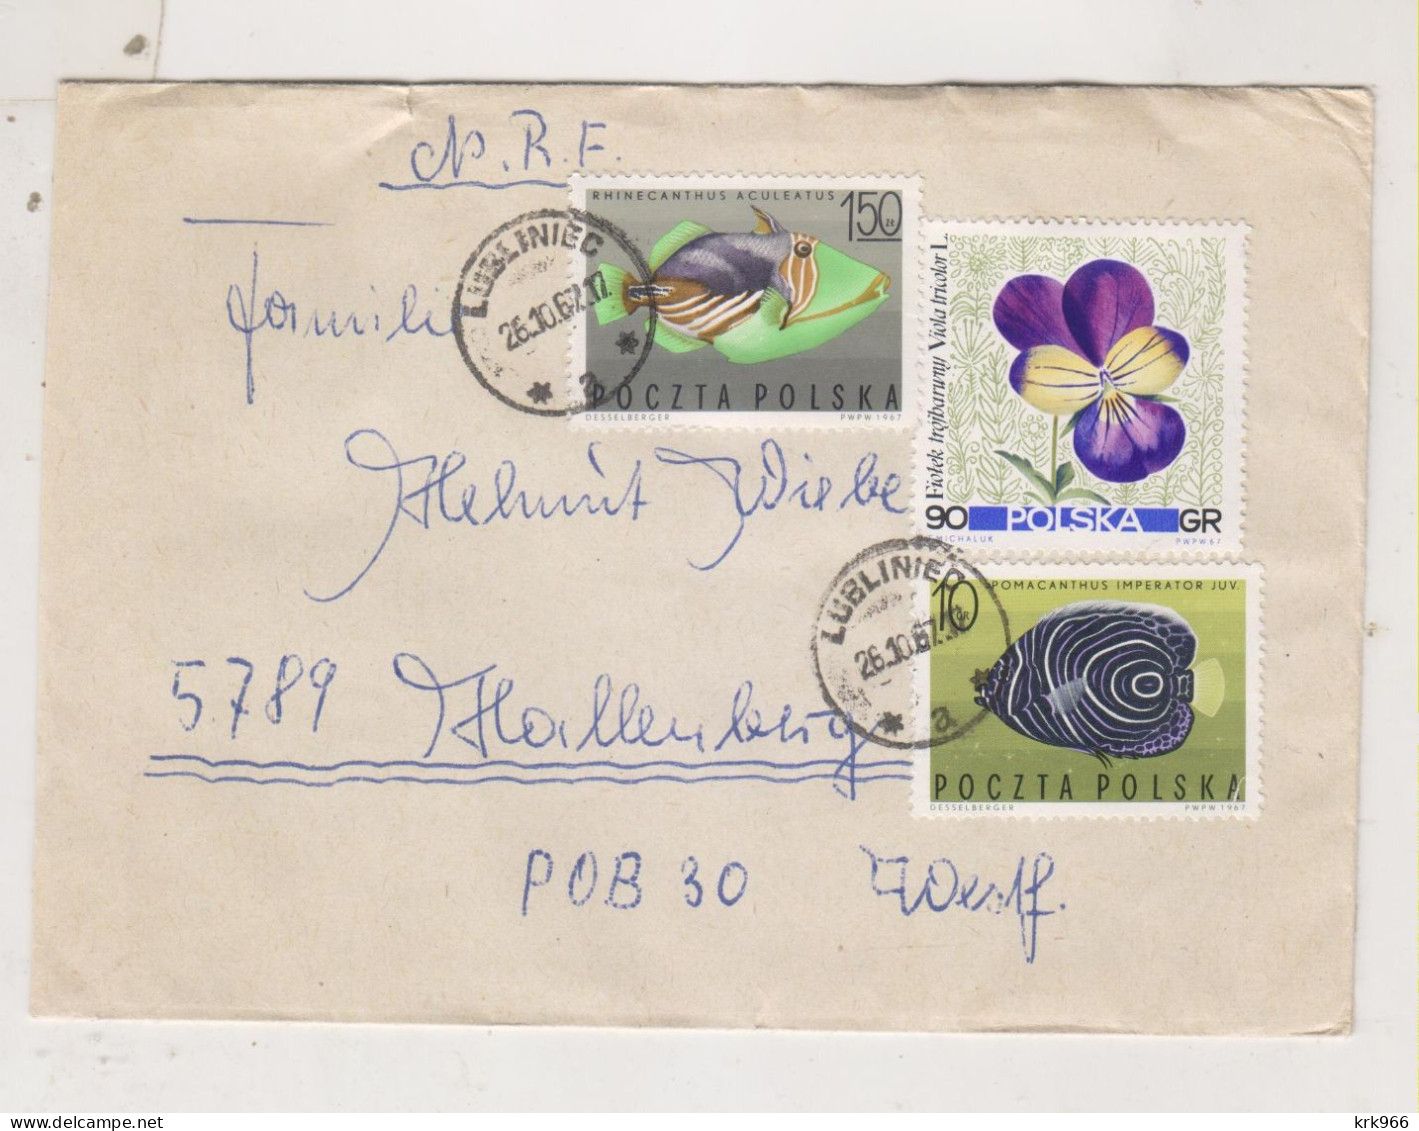 POLAND 1967  LUBLINIEC  Cover To Germany - Covers & Documents